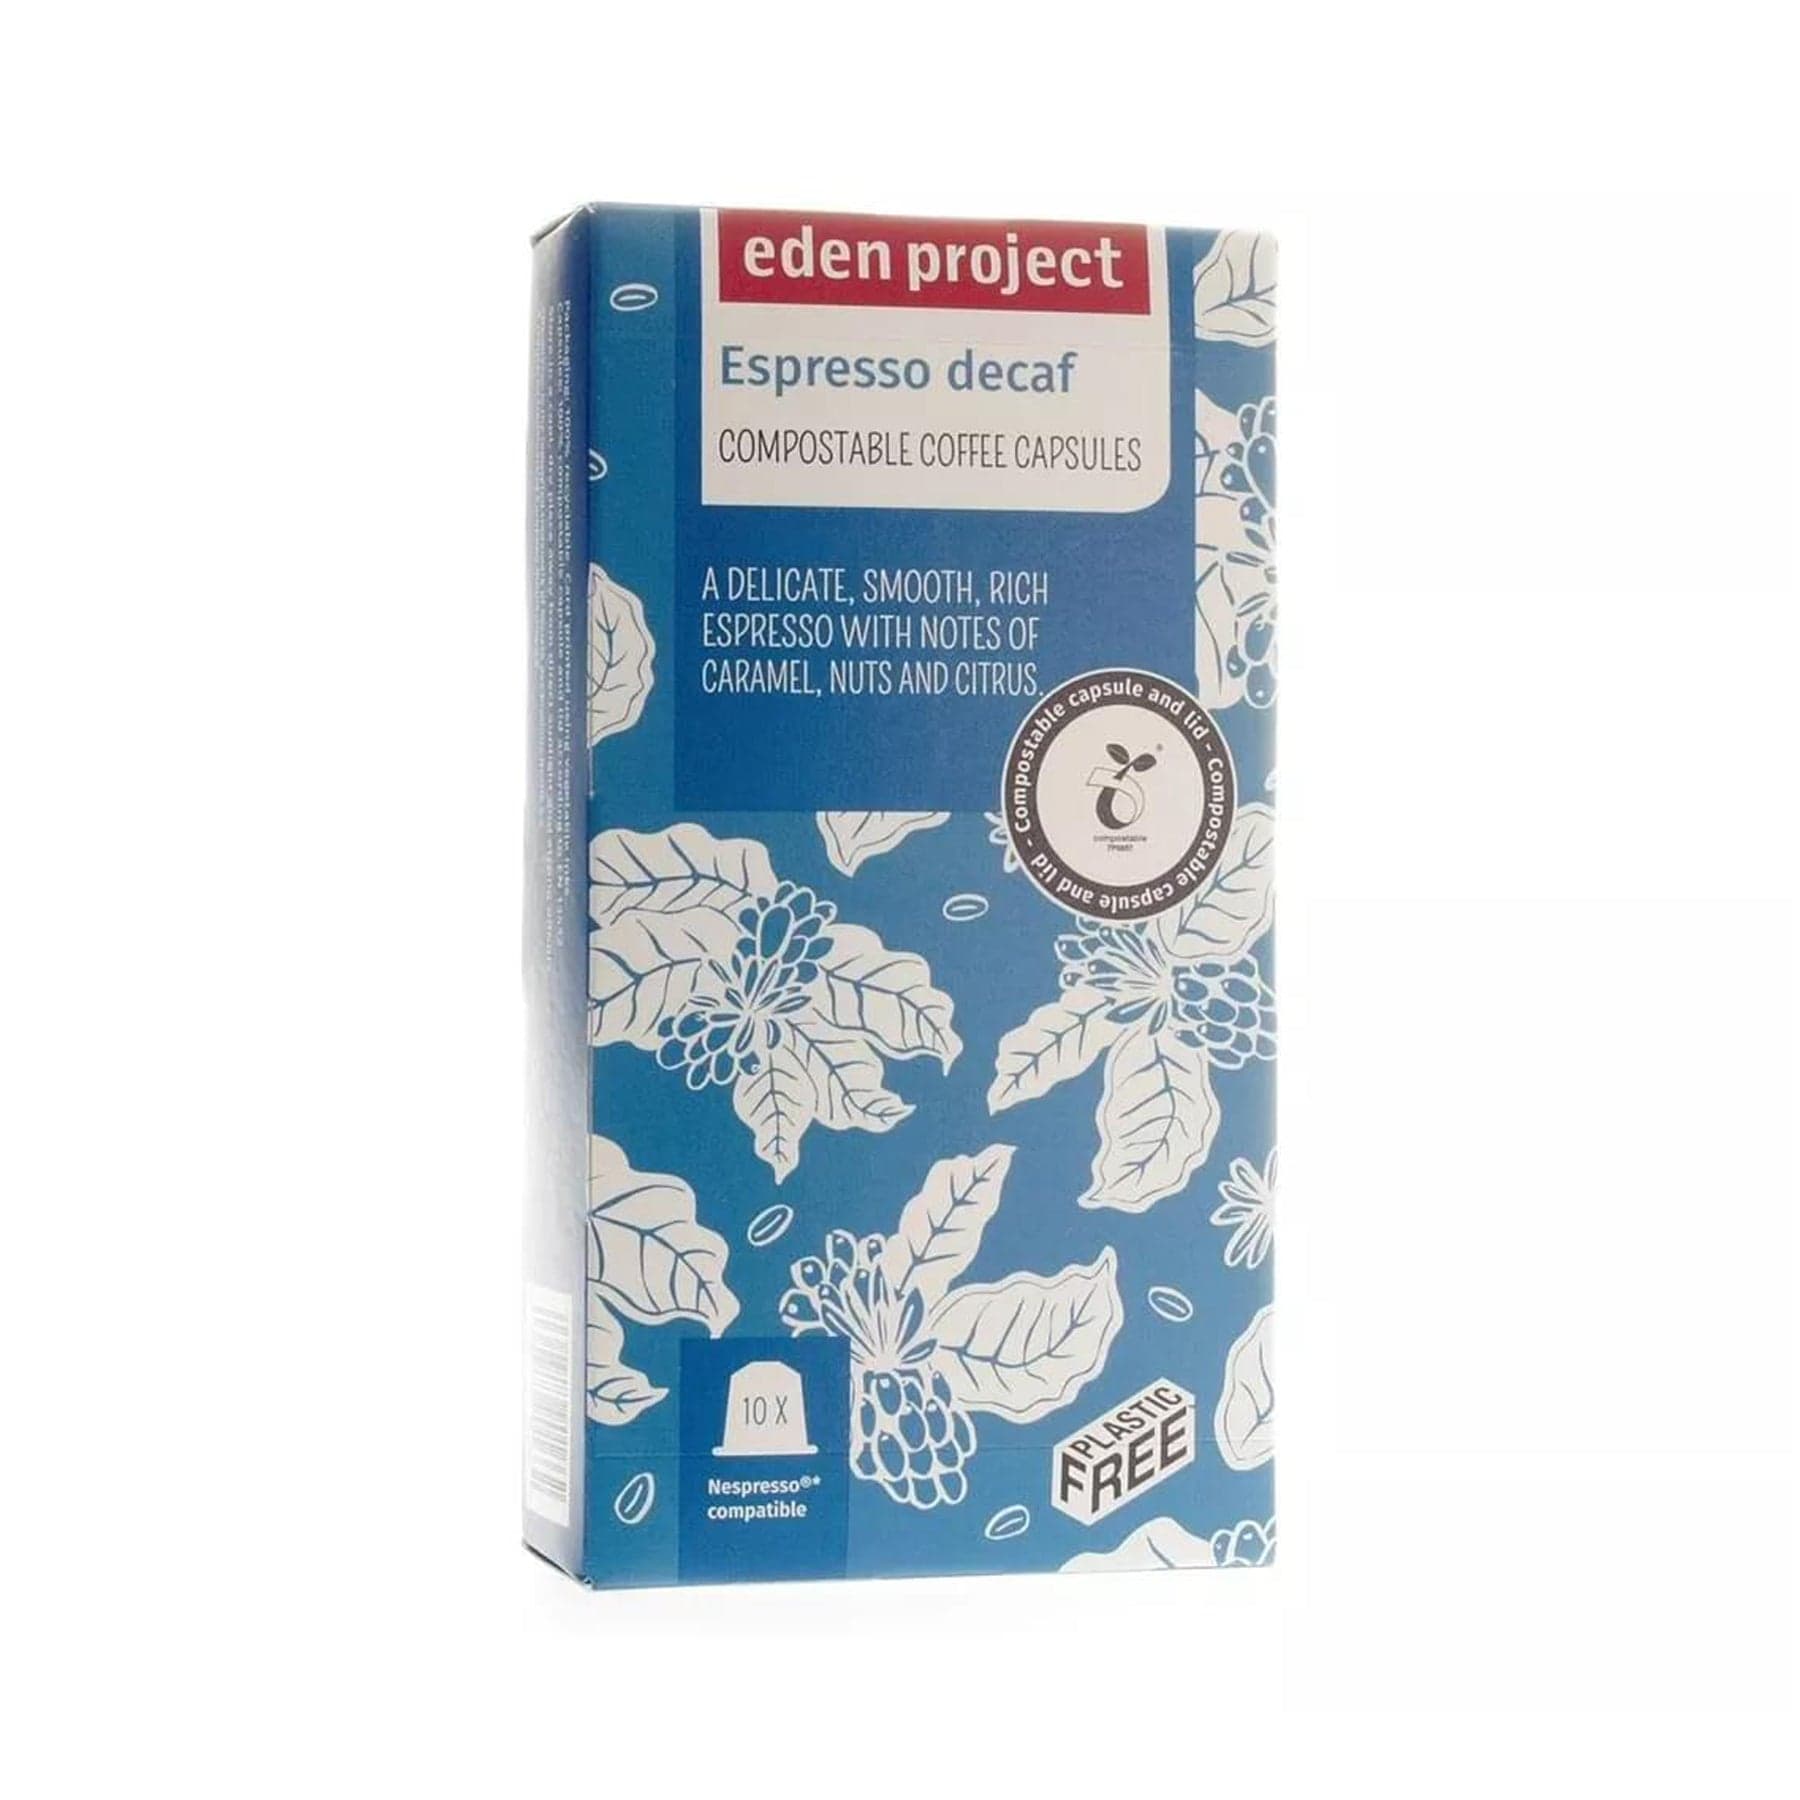 Eden Project compostable coffee capsules box, Espresso Decaf, eco-friendly Nespresso compatible pods packaging with floral design, caramel nuts citrus flavor notes, plastic-free initiative emblems.